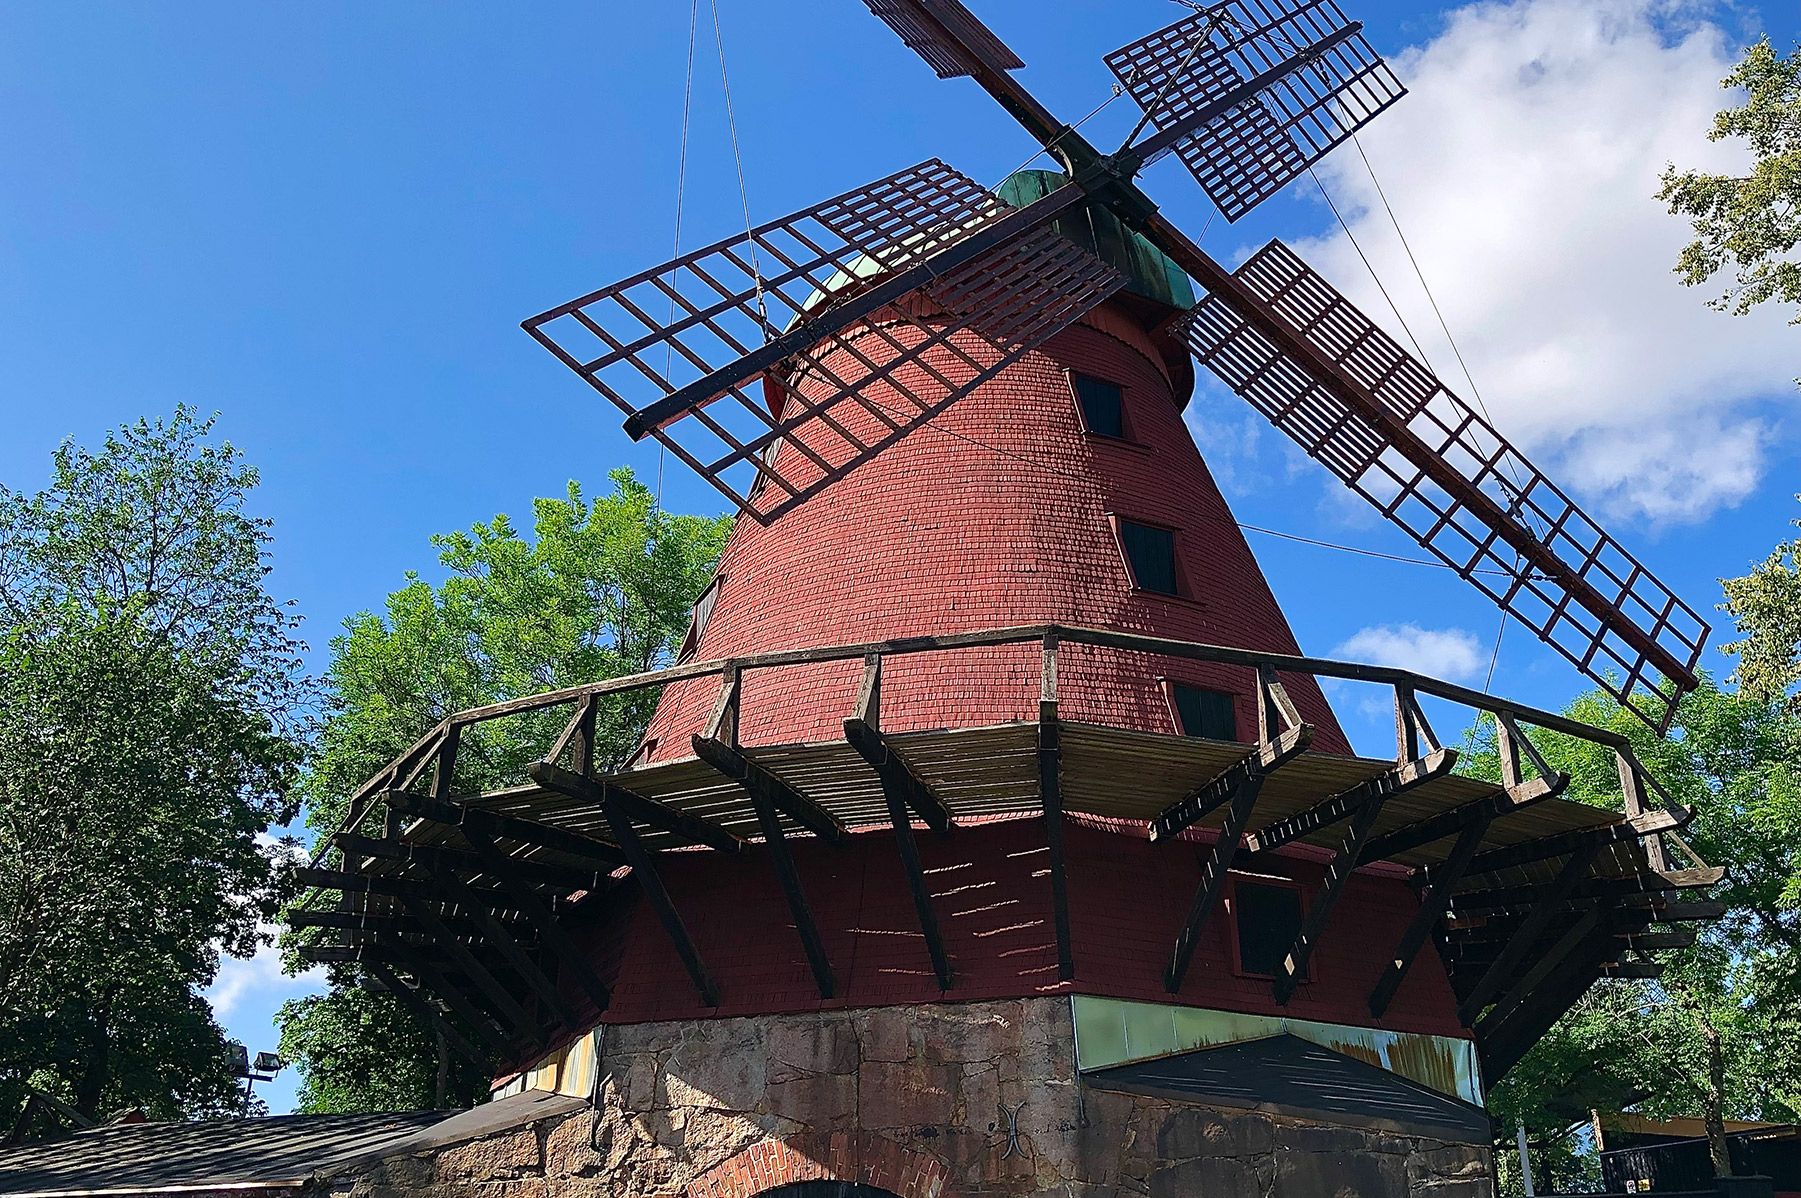 Samppalinna’s red wooden windmill, surrounded by green trees.